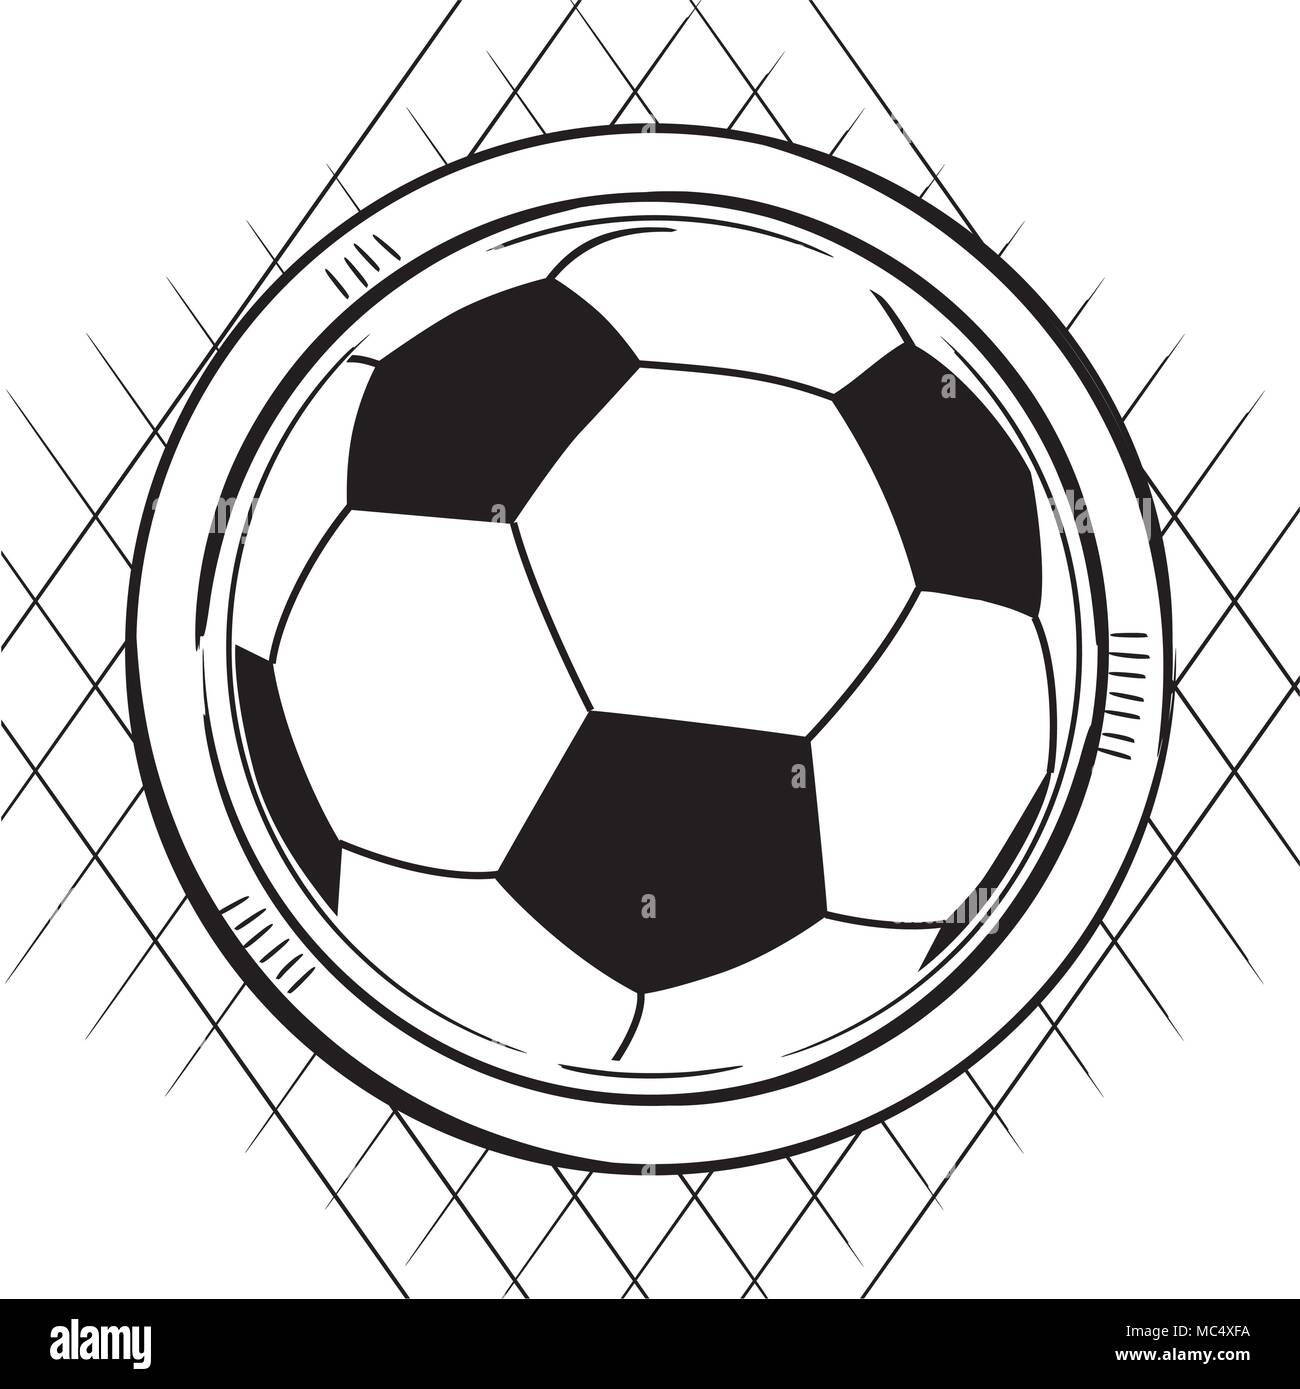 How to Draw a Football | Design School